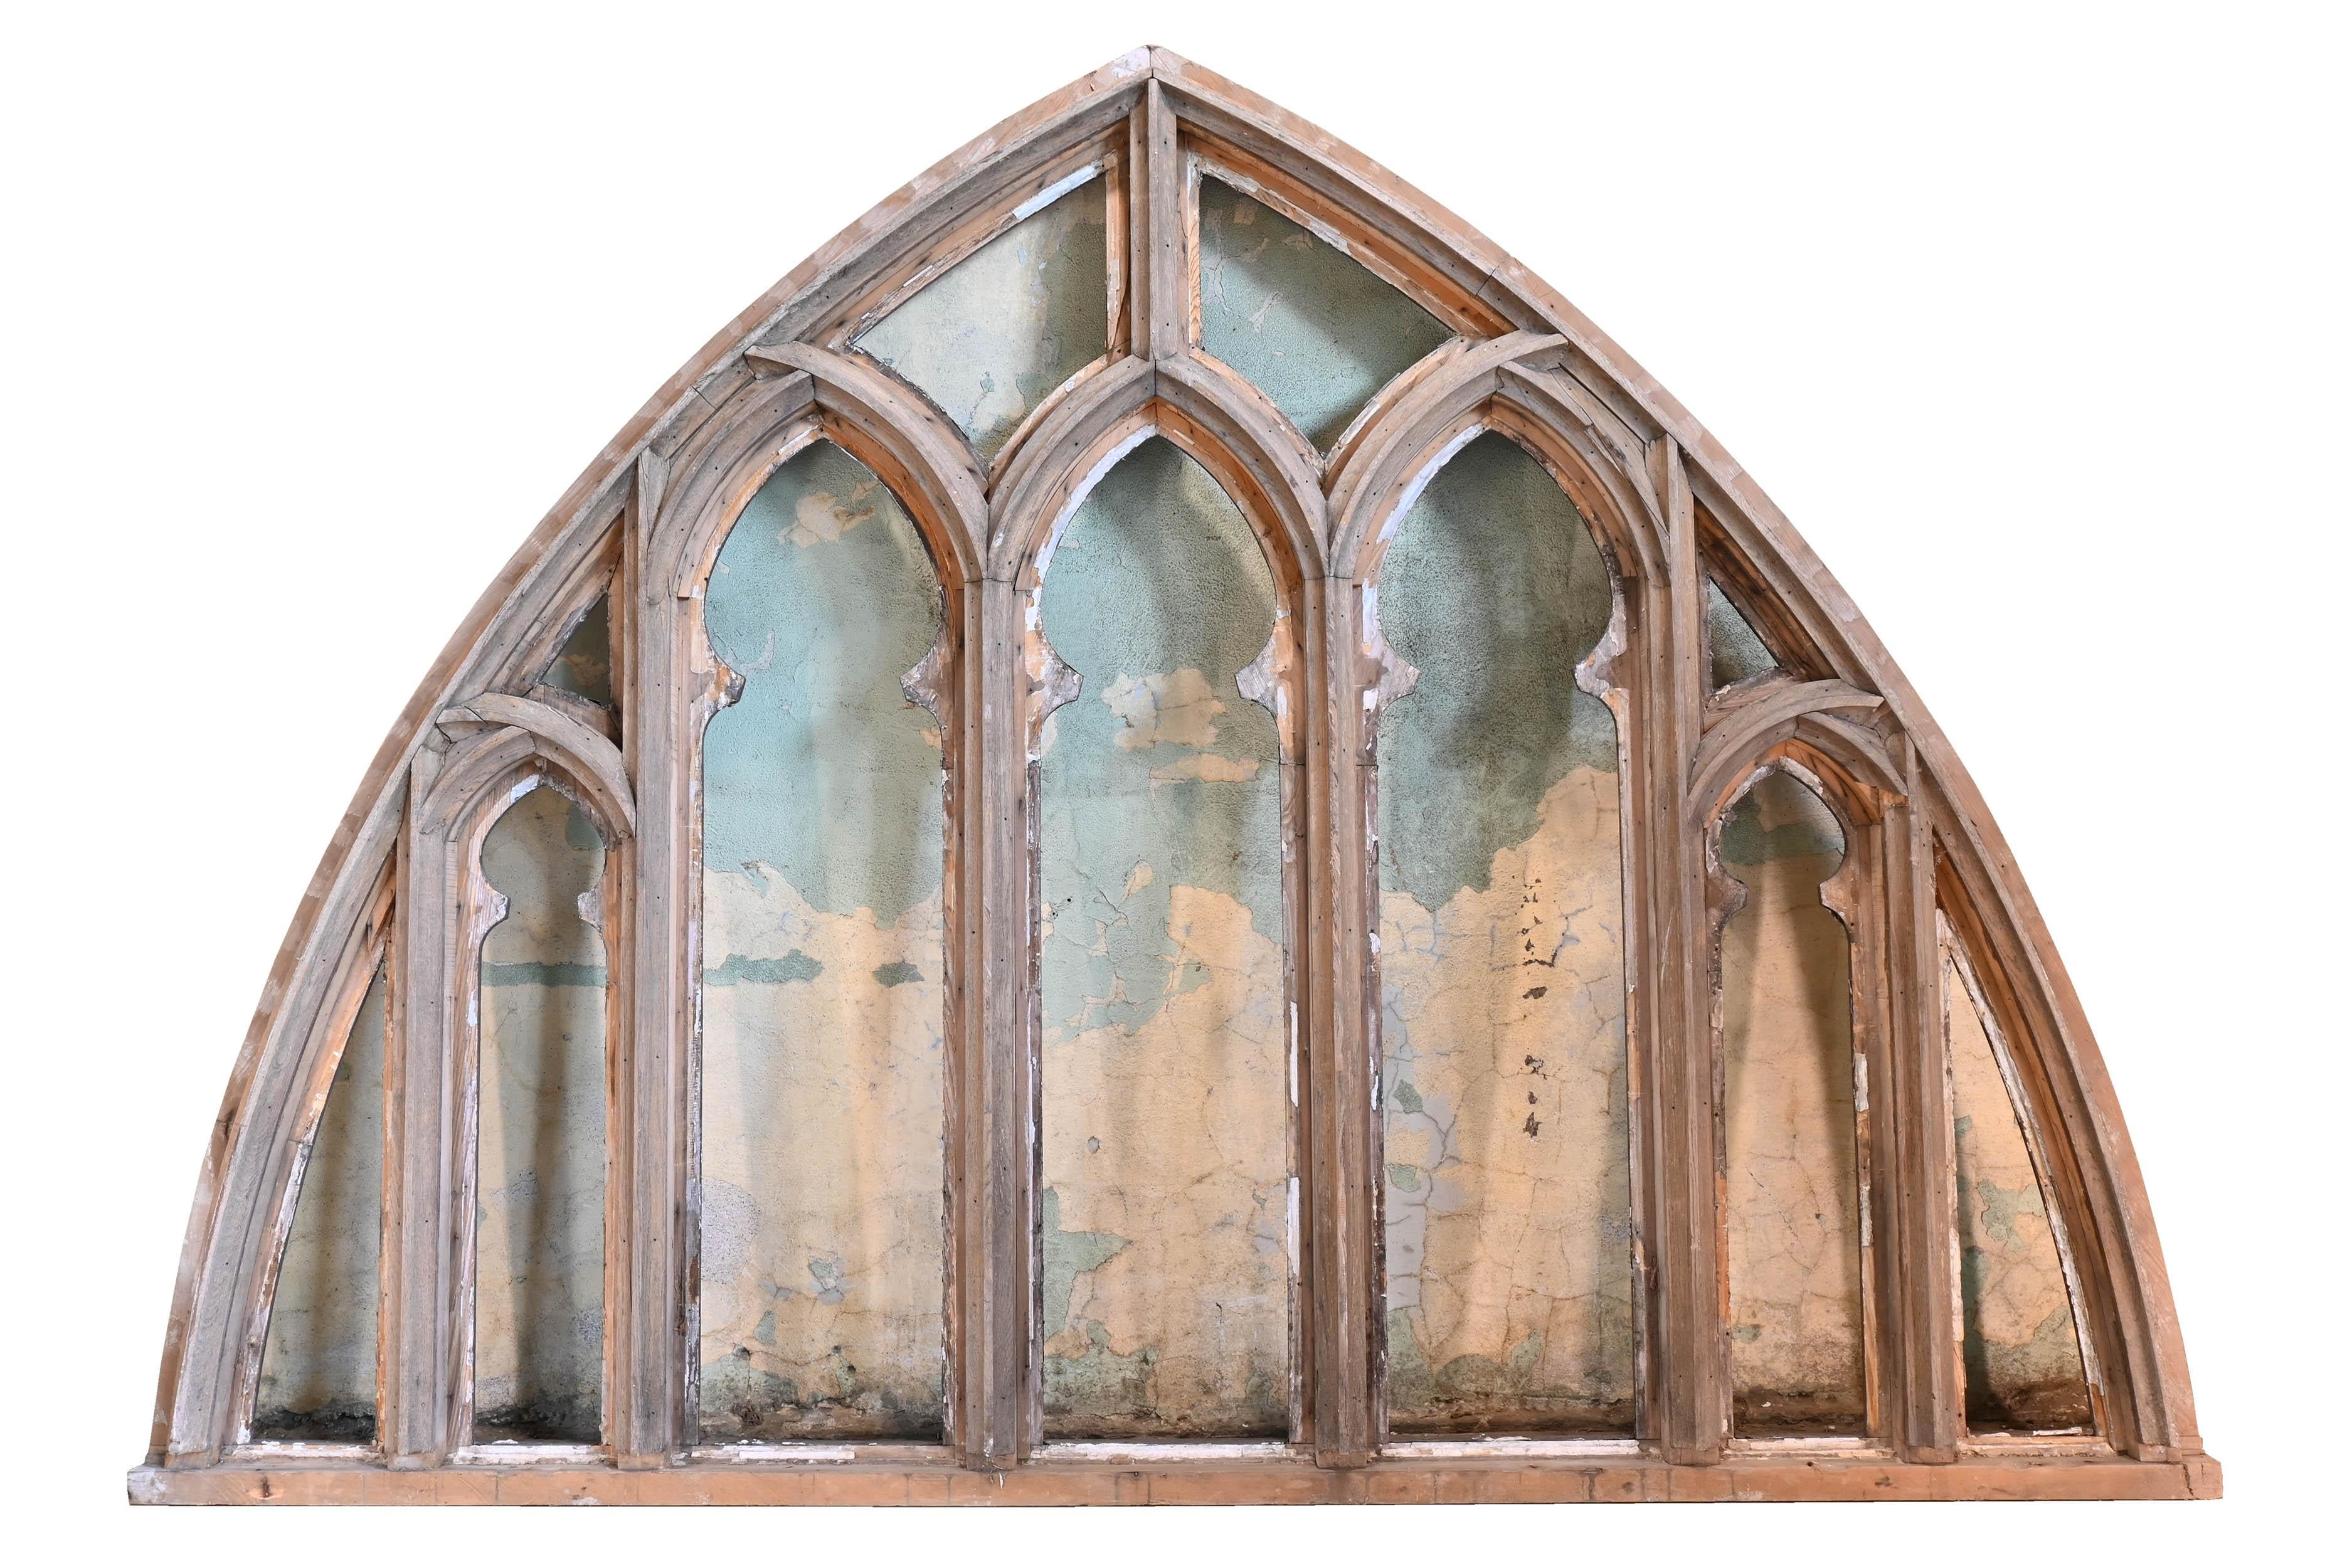 Matching pieces from this deconstruction! Soon we will be adding a quantity of large tracery bell tower covers in quantity. Stay tuned!

Salvaged from circa 1890s
Condition: Age consistent tracery with out glass
Material: Oak and fir
Finish: